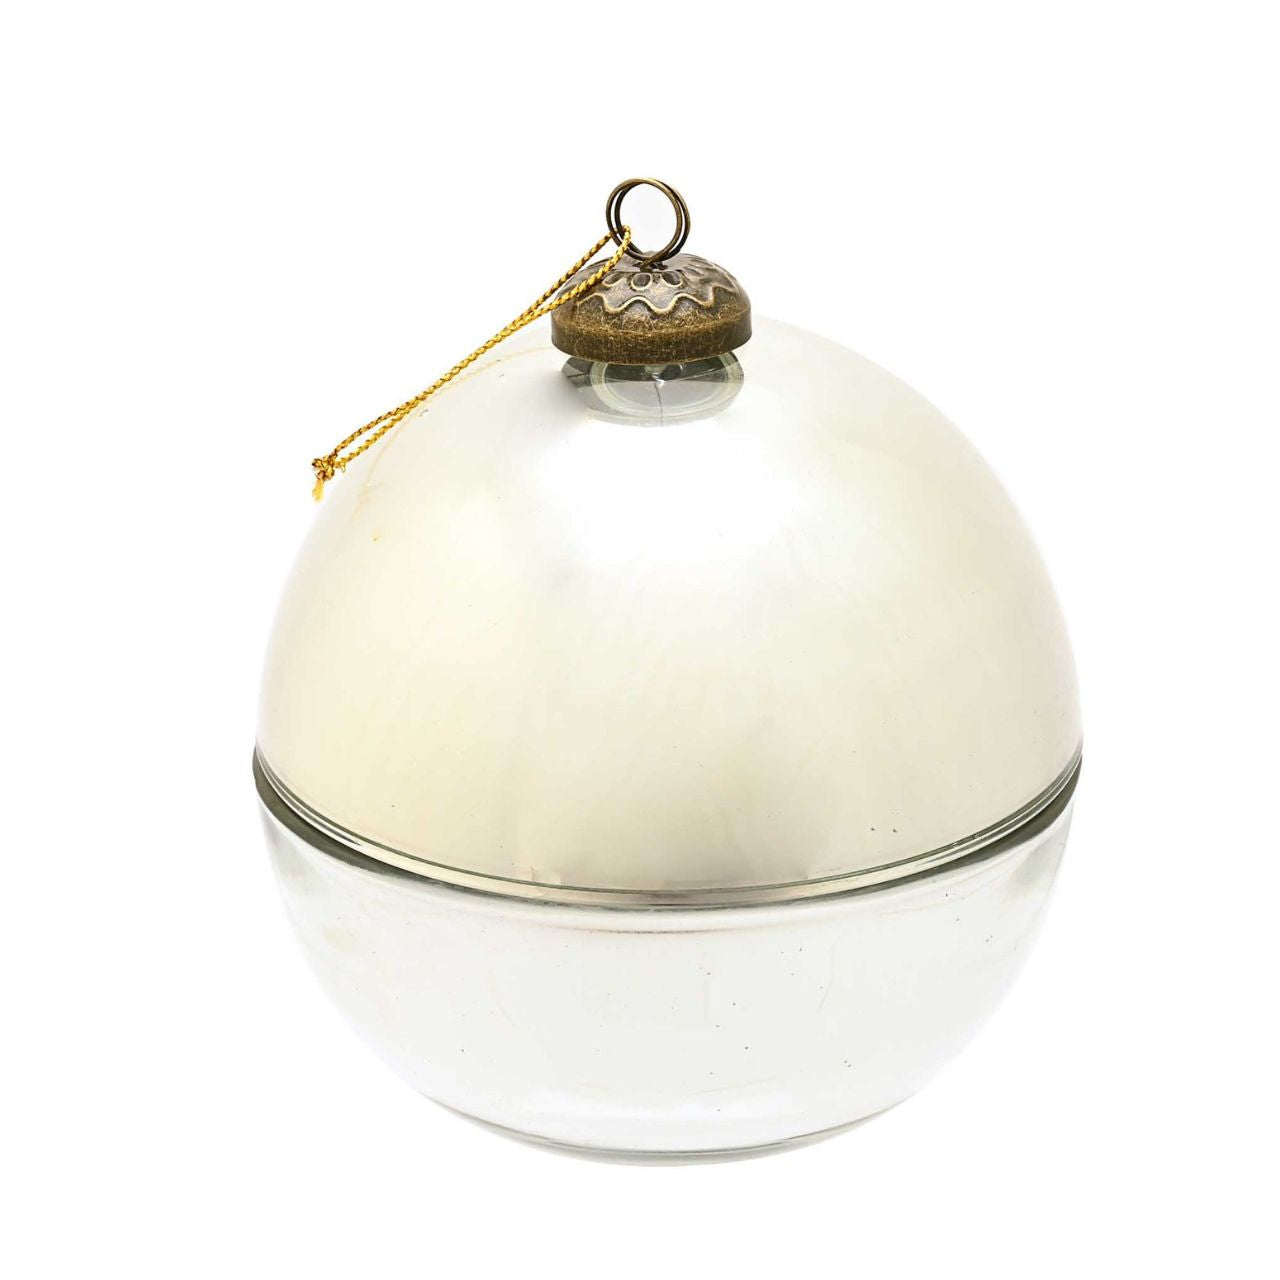 Silent Night Fragranced Glass Bauble Candle Christmas Silver  A Silent Night fragranced glass bauble candle.  This aromatic candle makes an eye-catching addition to homes during the festive season.